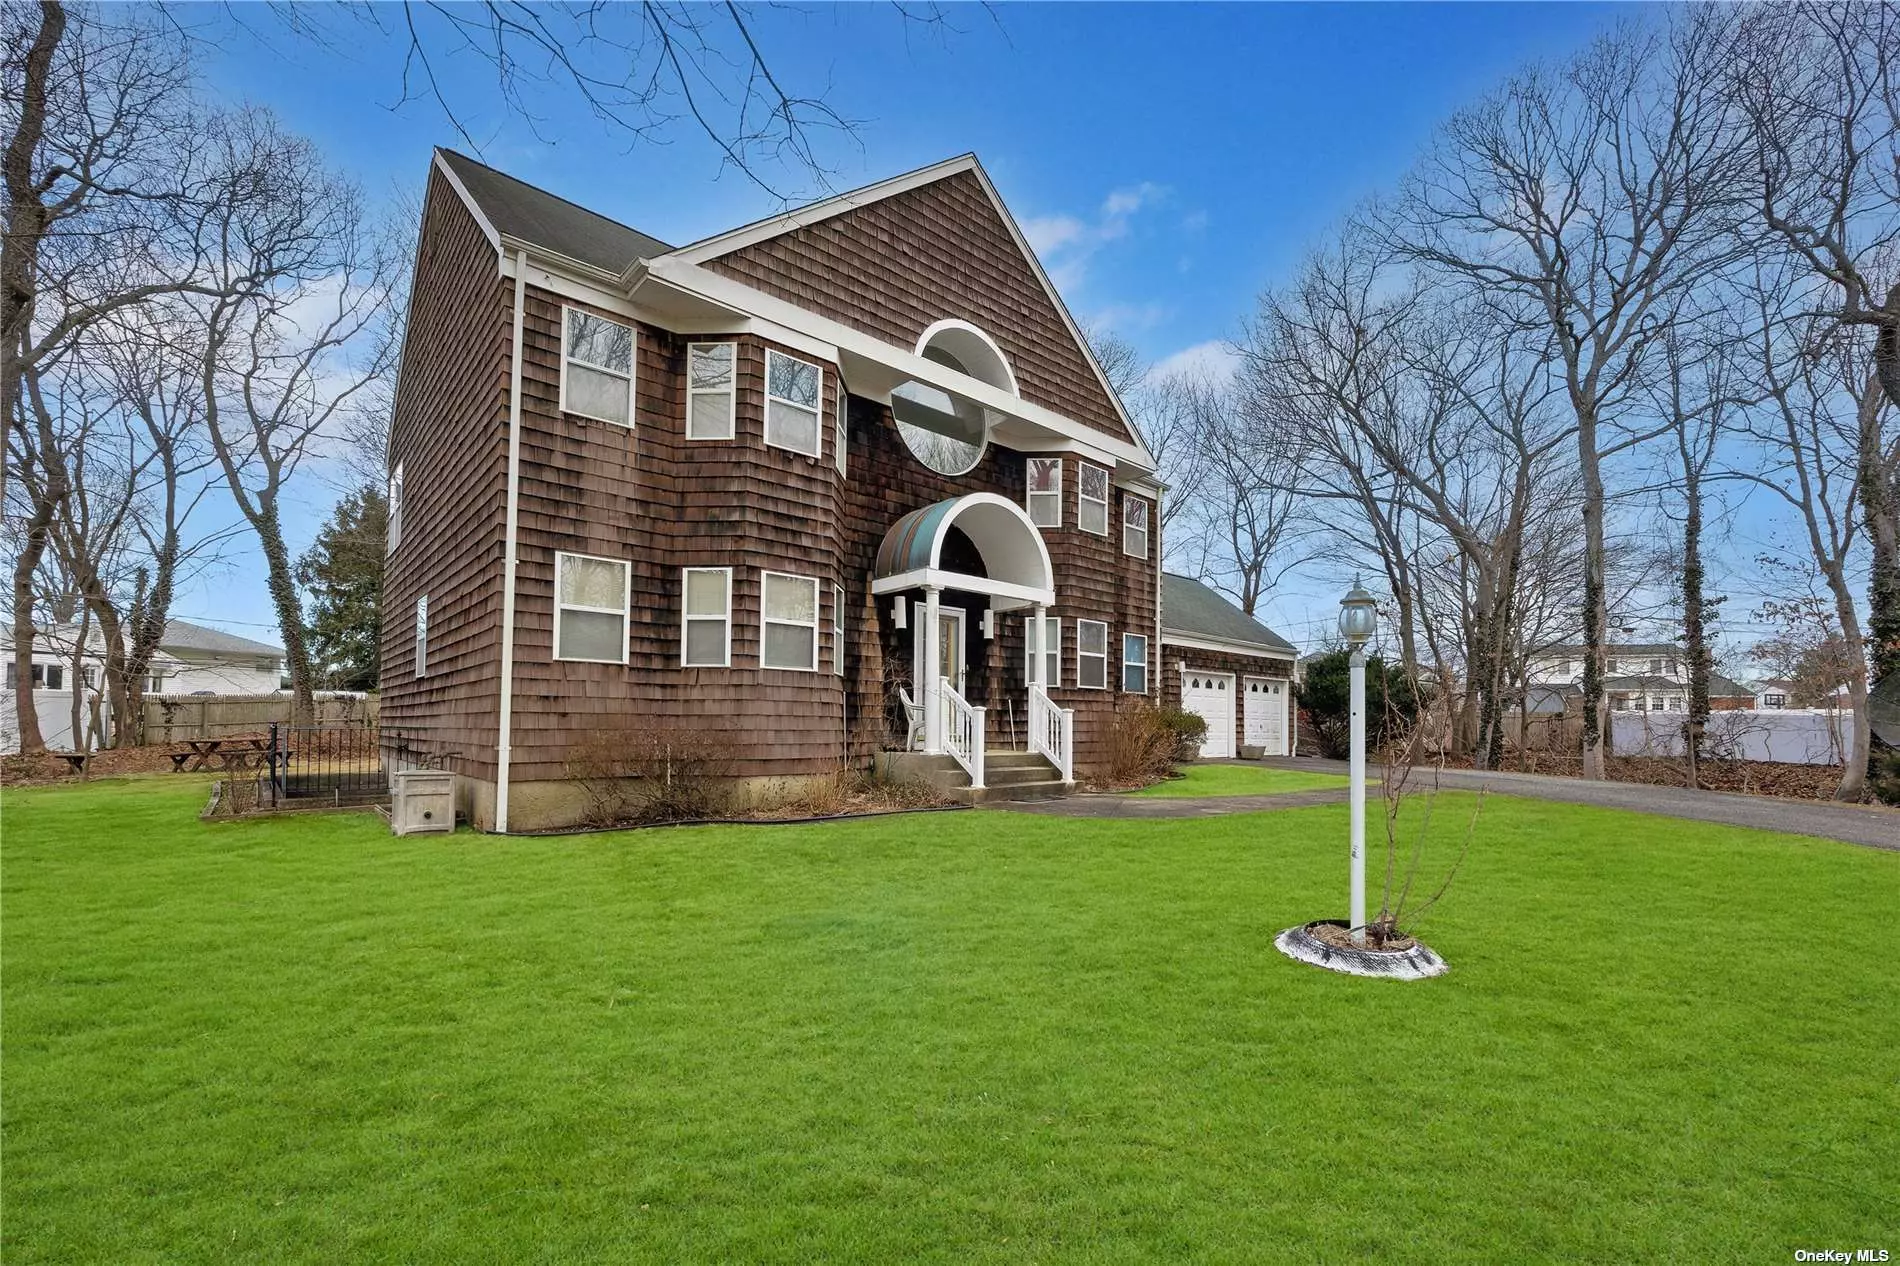 GORGEOUS HOME; PRIVATE & WELL MAINTAIN; WELL LIT FOYER WITH 23 FOOT CEILING; BEAUTIFUL KITCHEN; HARDWOOD FLOORS; GREAT FOR ENTERTAINMENT; WALKOUT BASEMENT; AND NEW ROOF WITH WARRANTY (01/24/2023). CALL FOR A PRIVATE SHOWING!